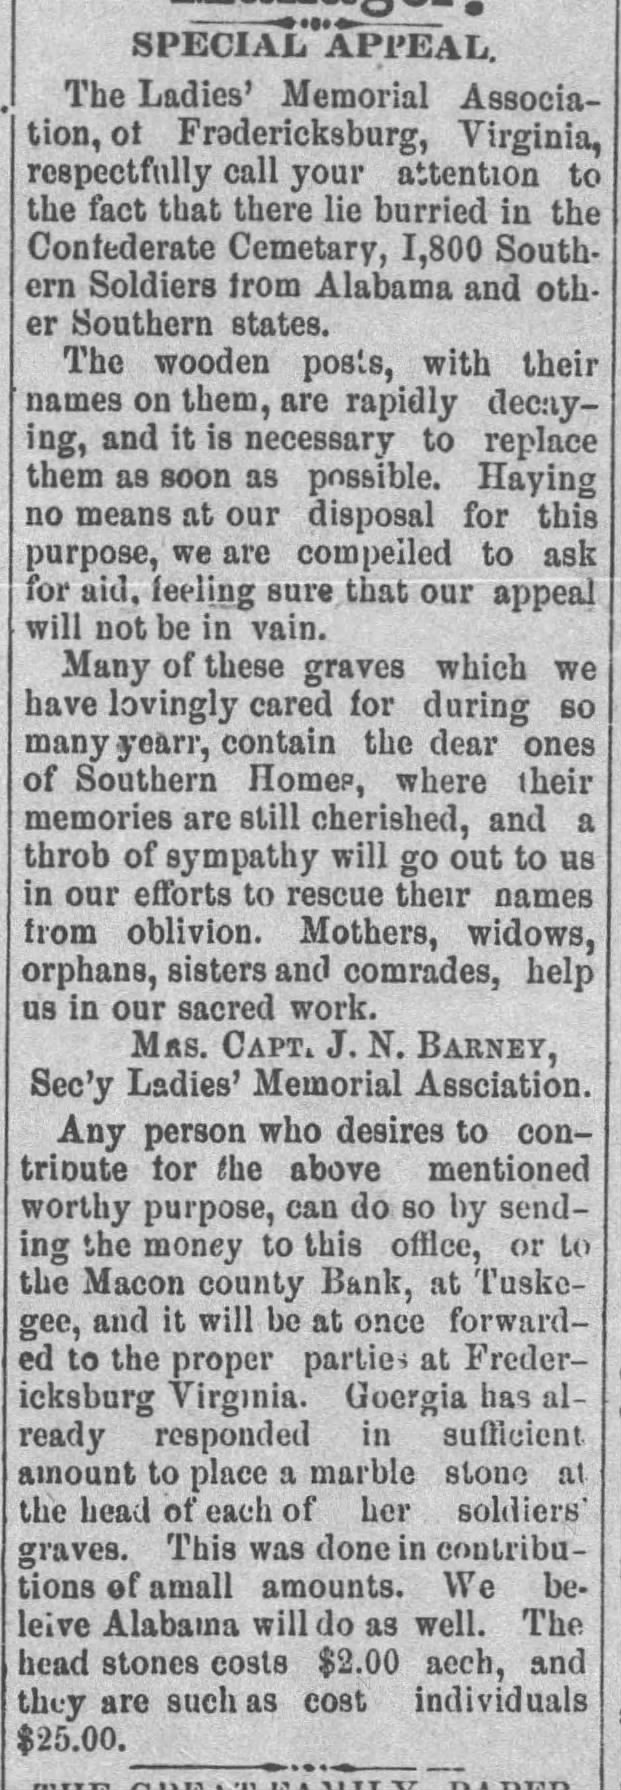 Special Appeal, The Tuskegee News (Tuskegee, Alabama) June 12, 1890, page 3